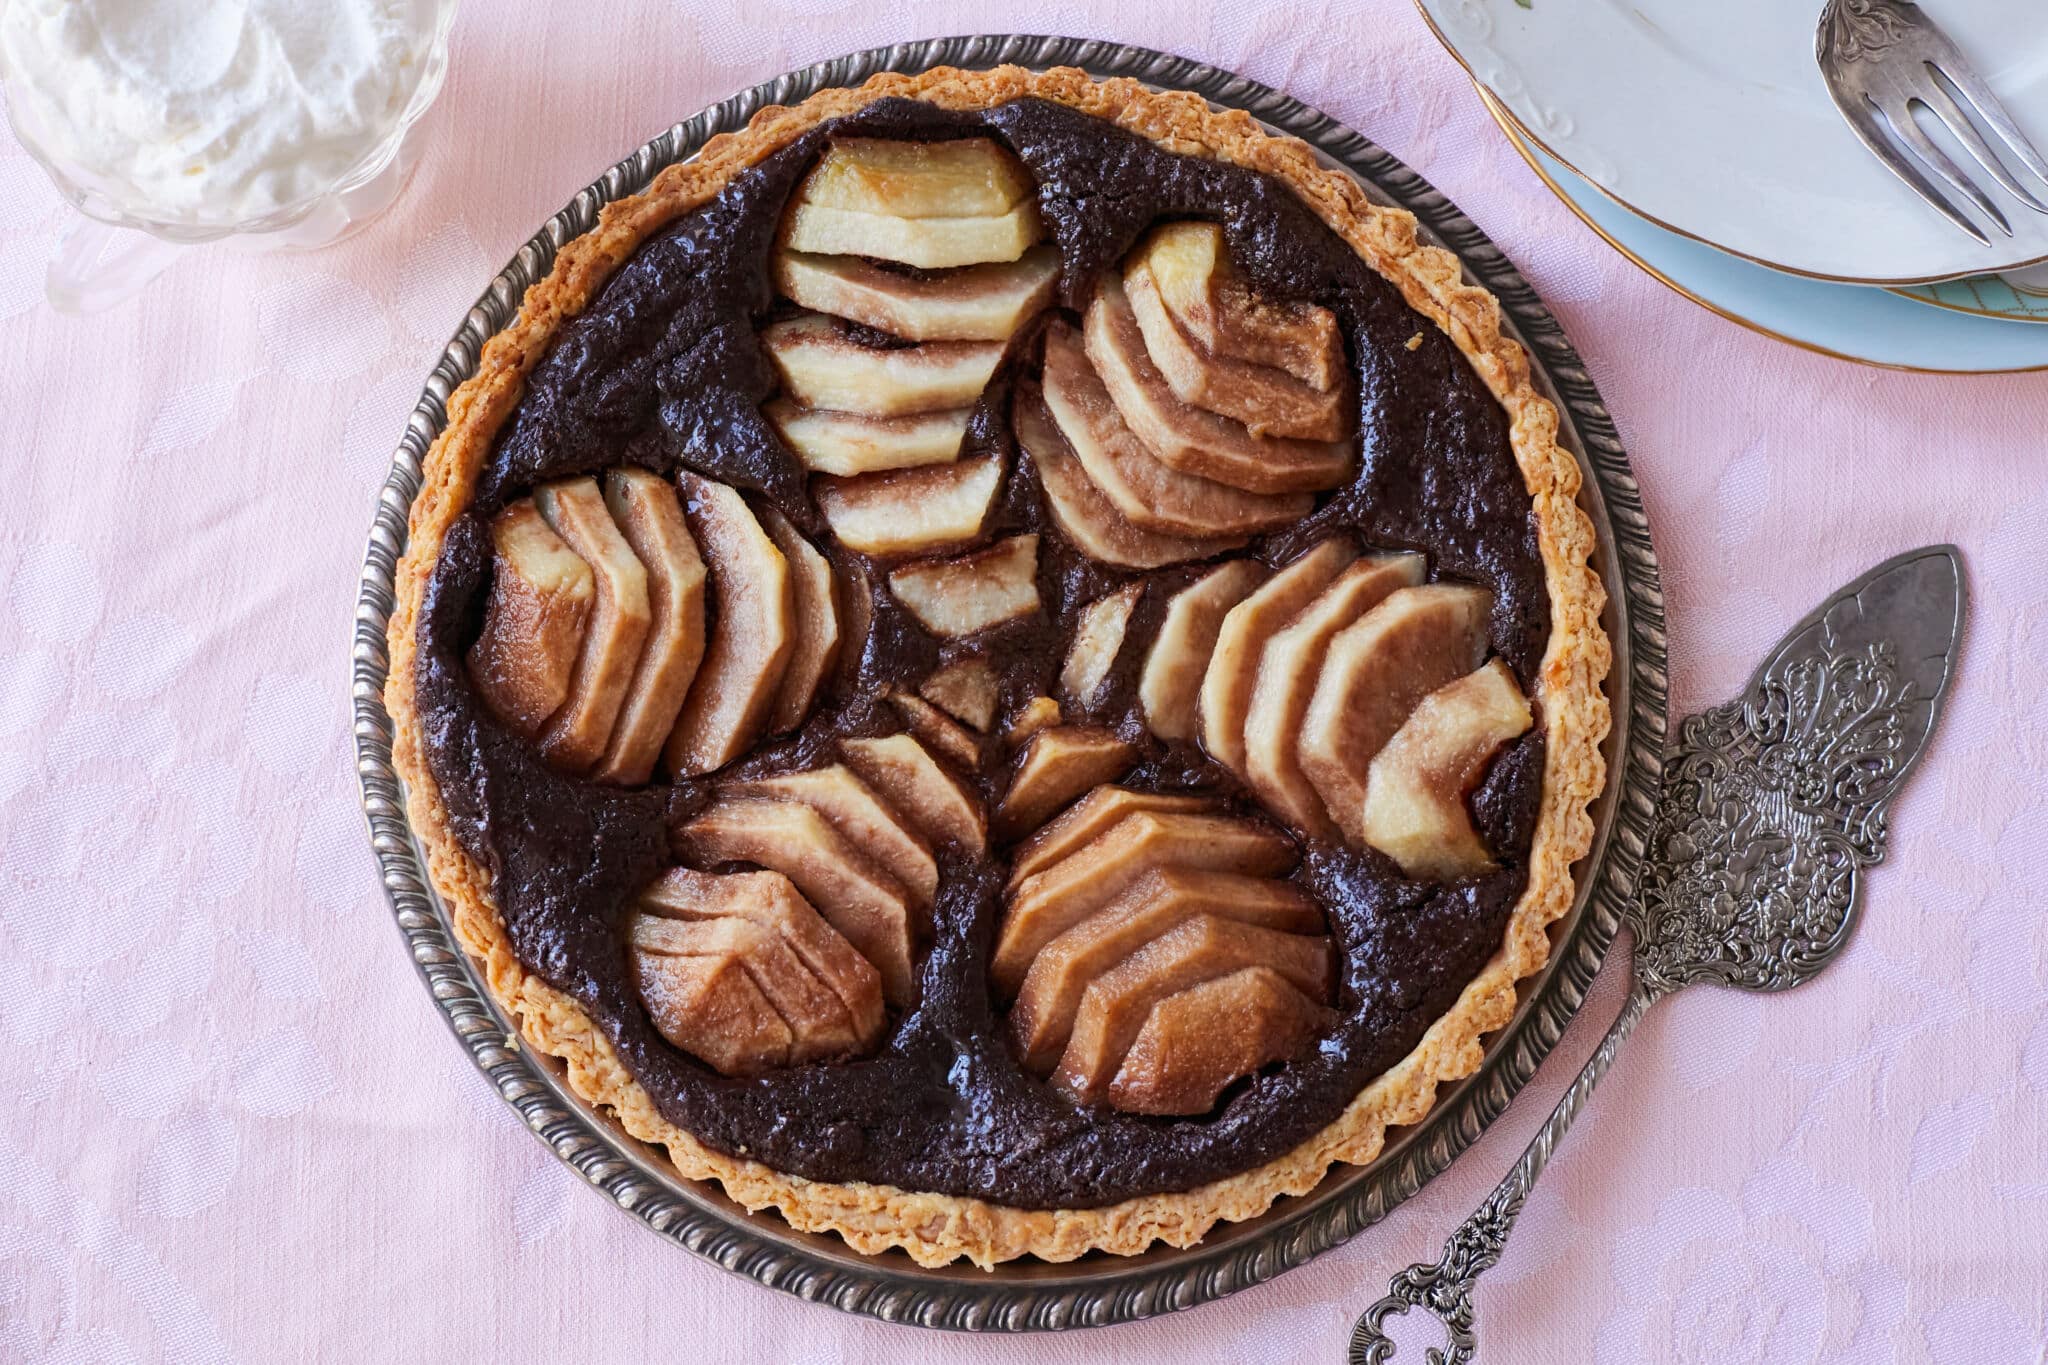 A decadent Pear and Chocolate Frangipane Tart is served on a silver platter. It has golden crispy crust, a lush almond cocoa filling topped with meltingly tender sliced pears.